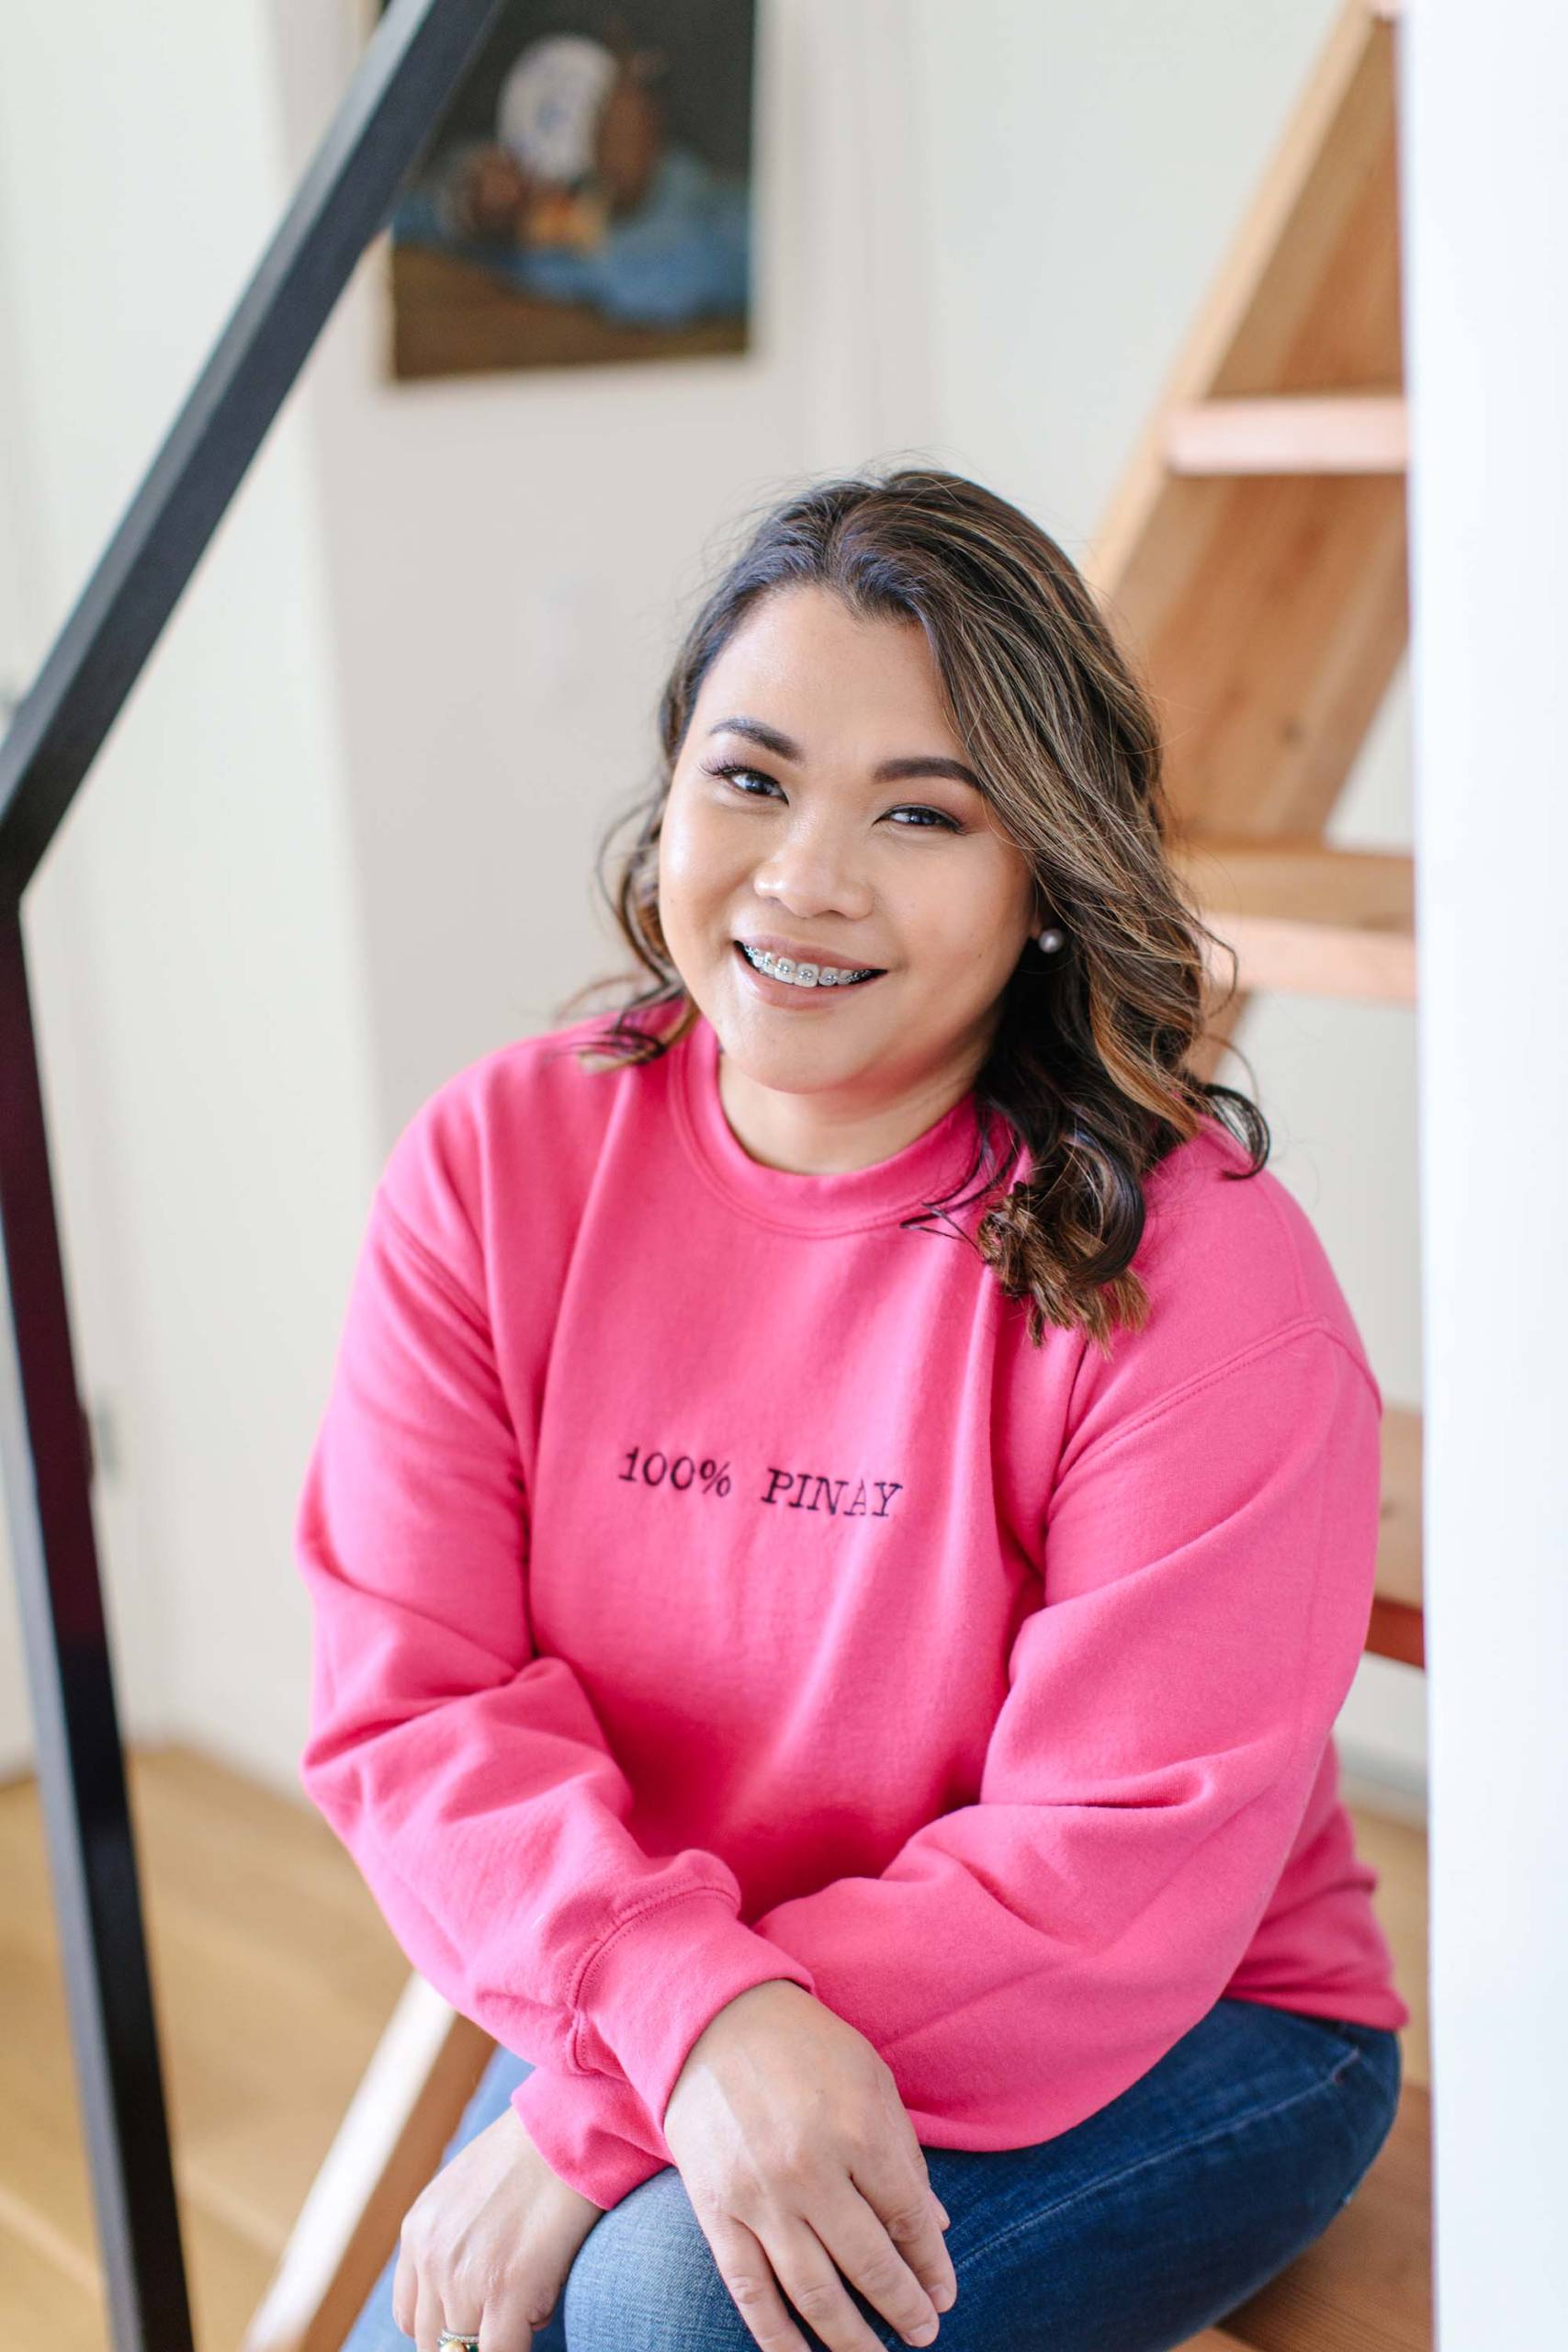 A Filipina woman seated on a staircase poses for a portrait. The text on the front of her pink sweatshirt reads, "100% Pinay".